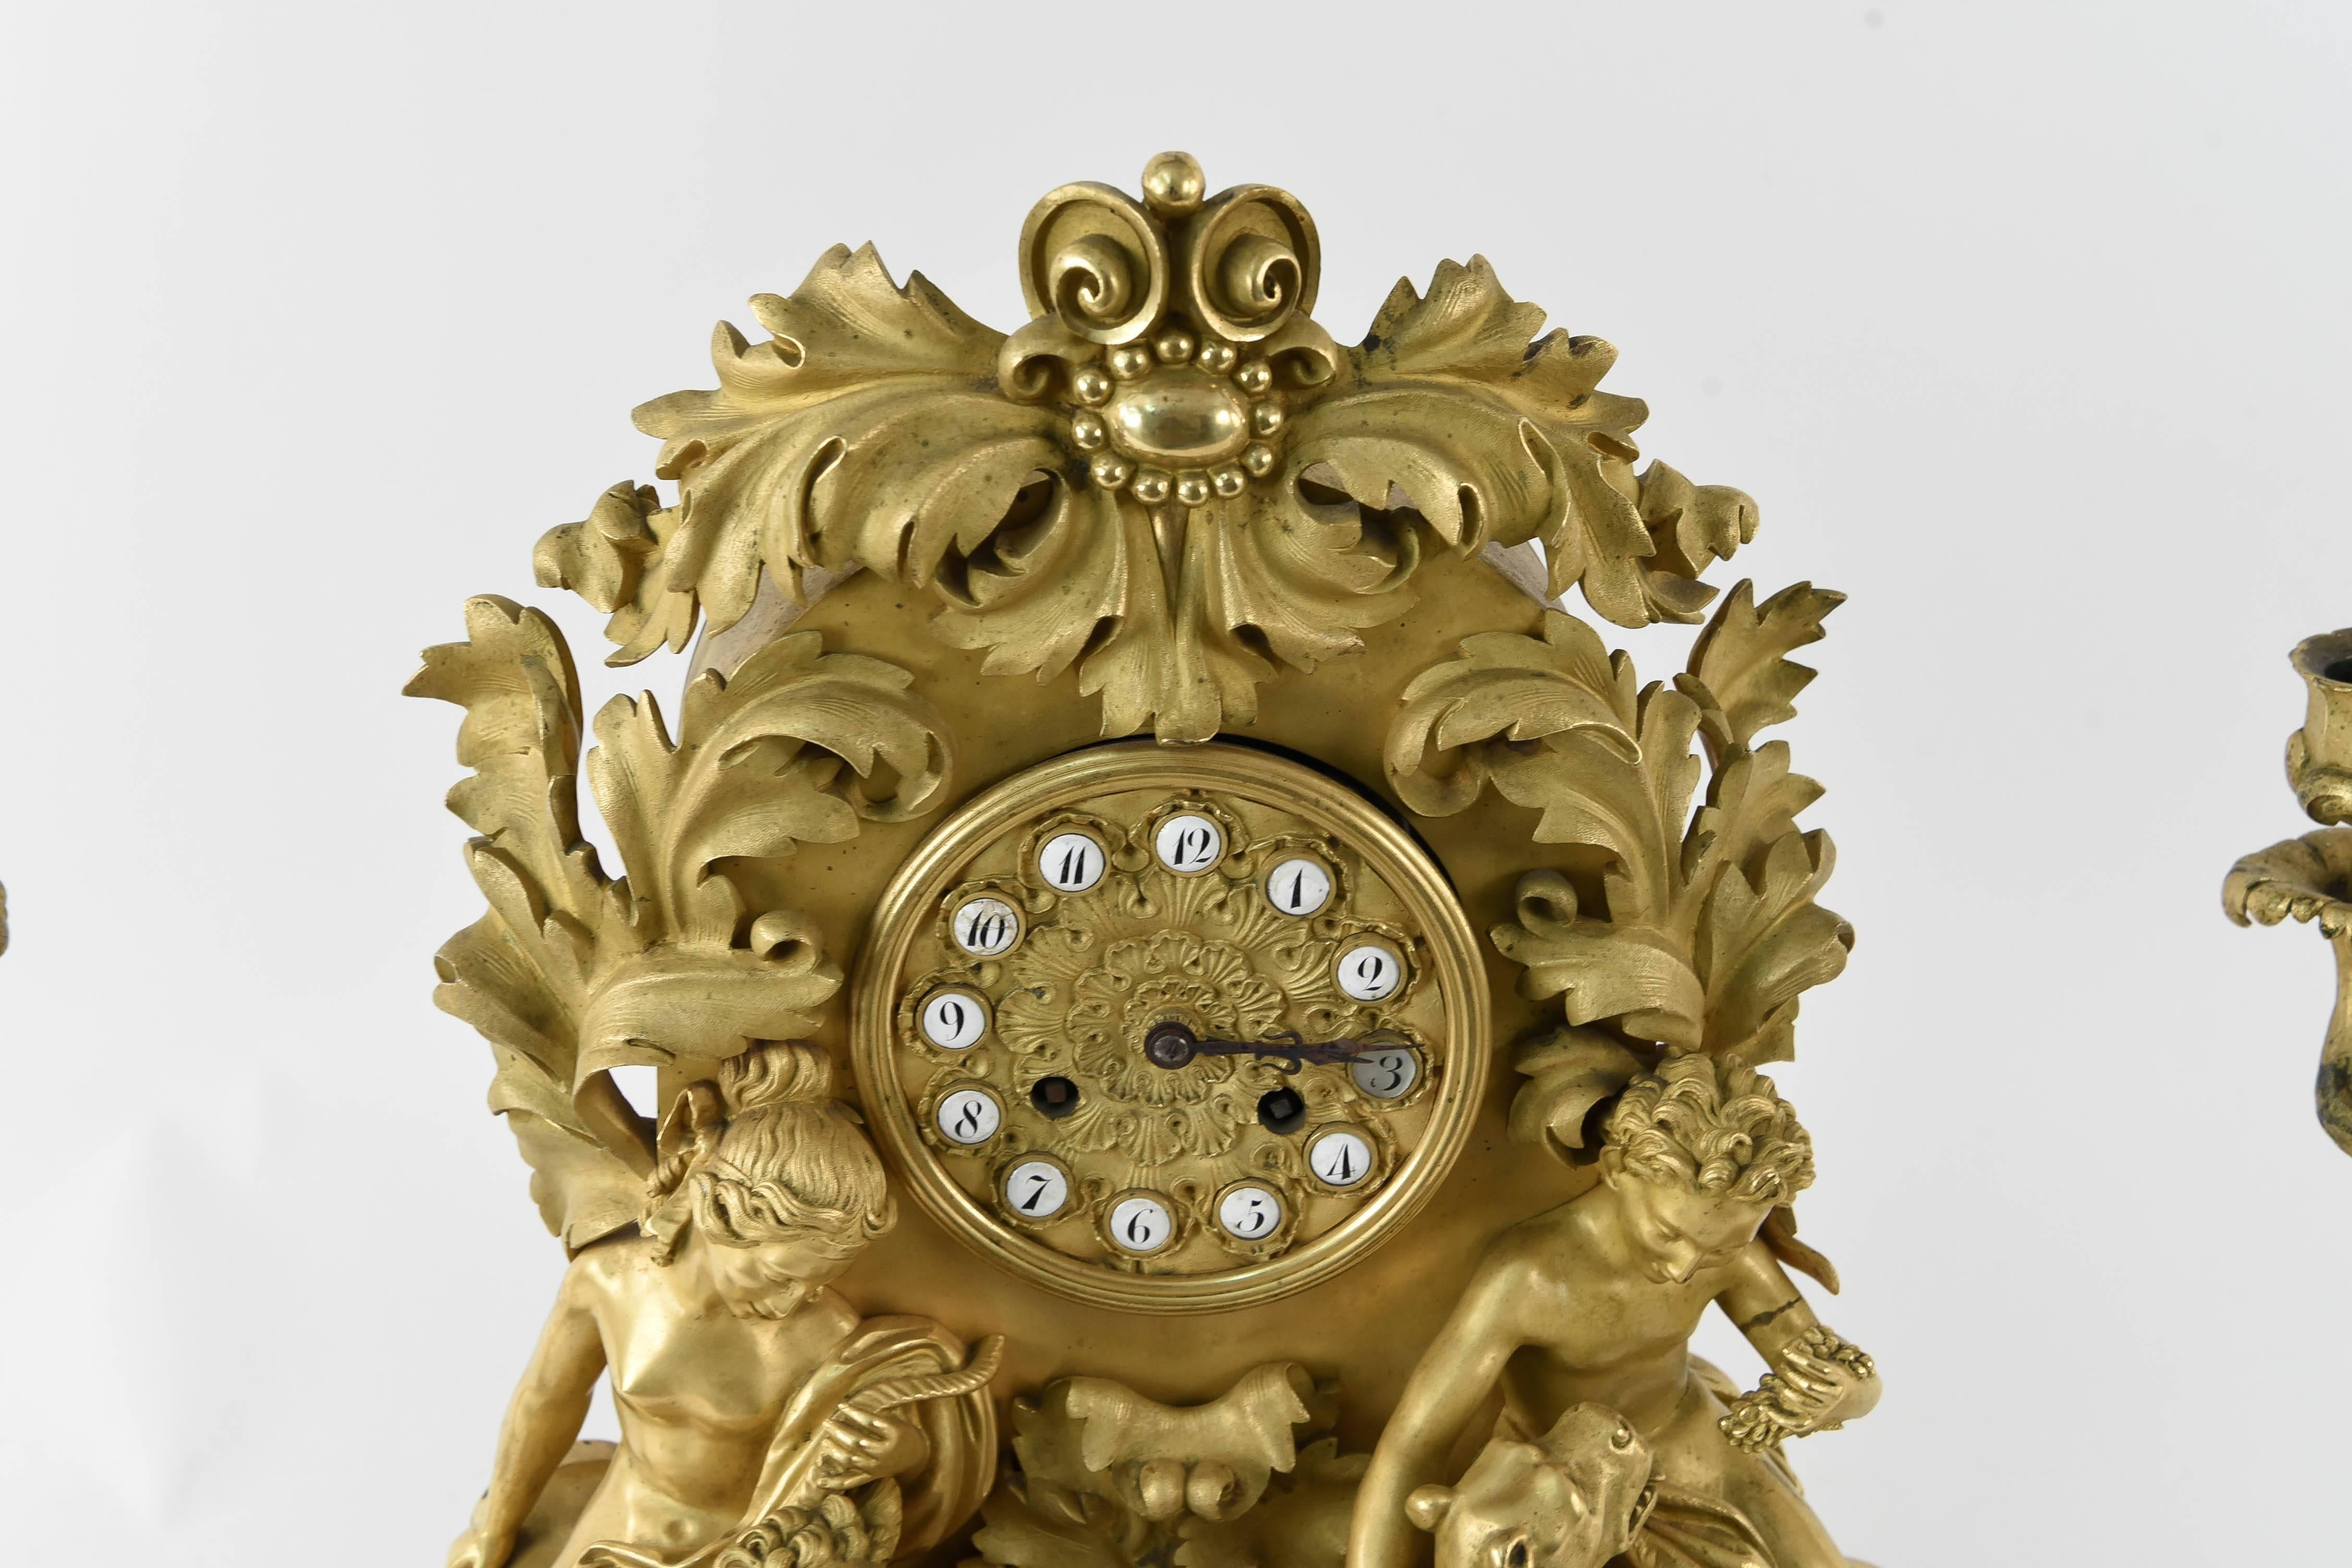 An amazing piece dating to the early 19th century. This clock set is of the best quality, a true museum piece showcasing the expert bronze work that was done by the French at the turn of the 19th century.